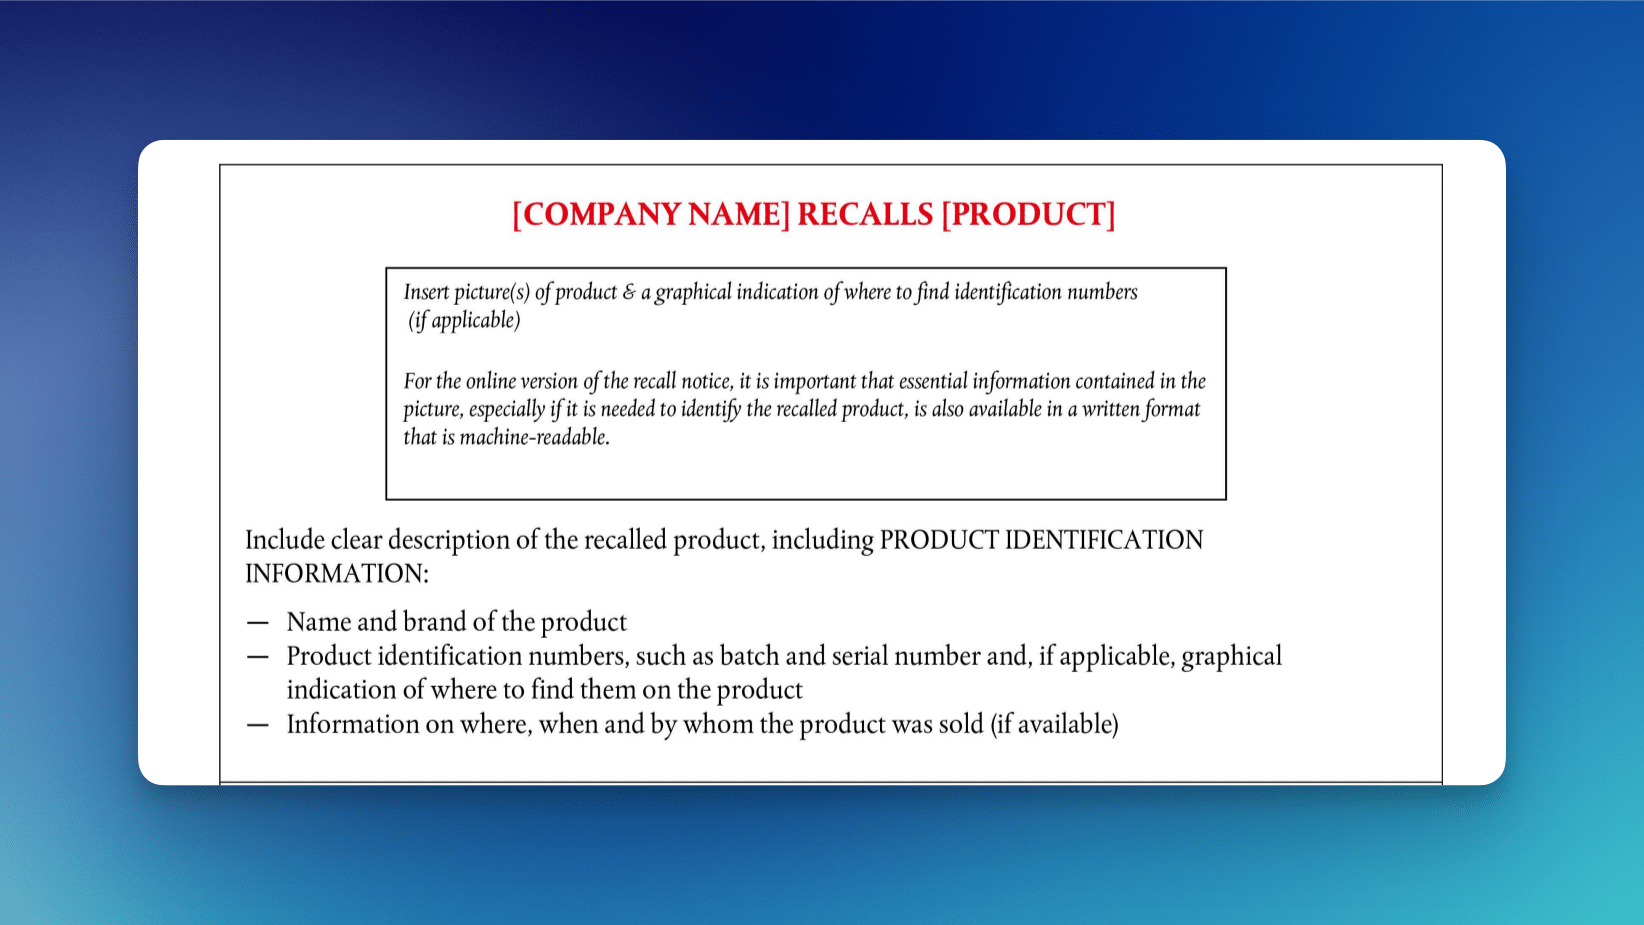 Streamlined Product Recall Notices: What You Need to Know